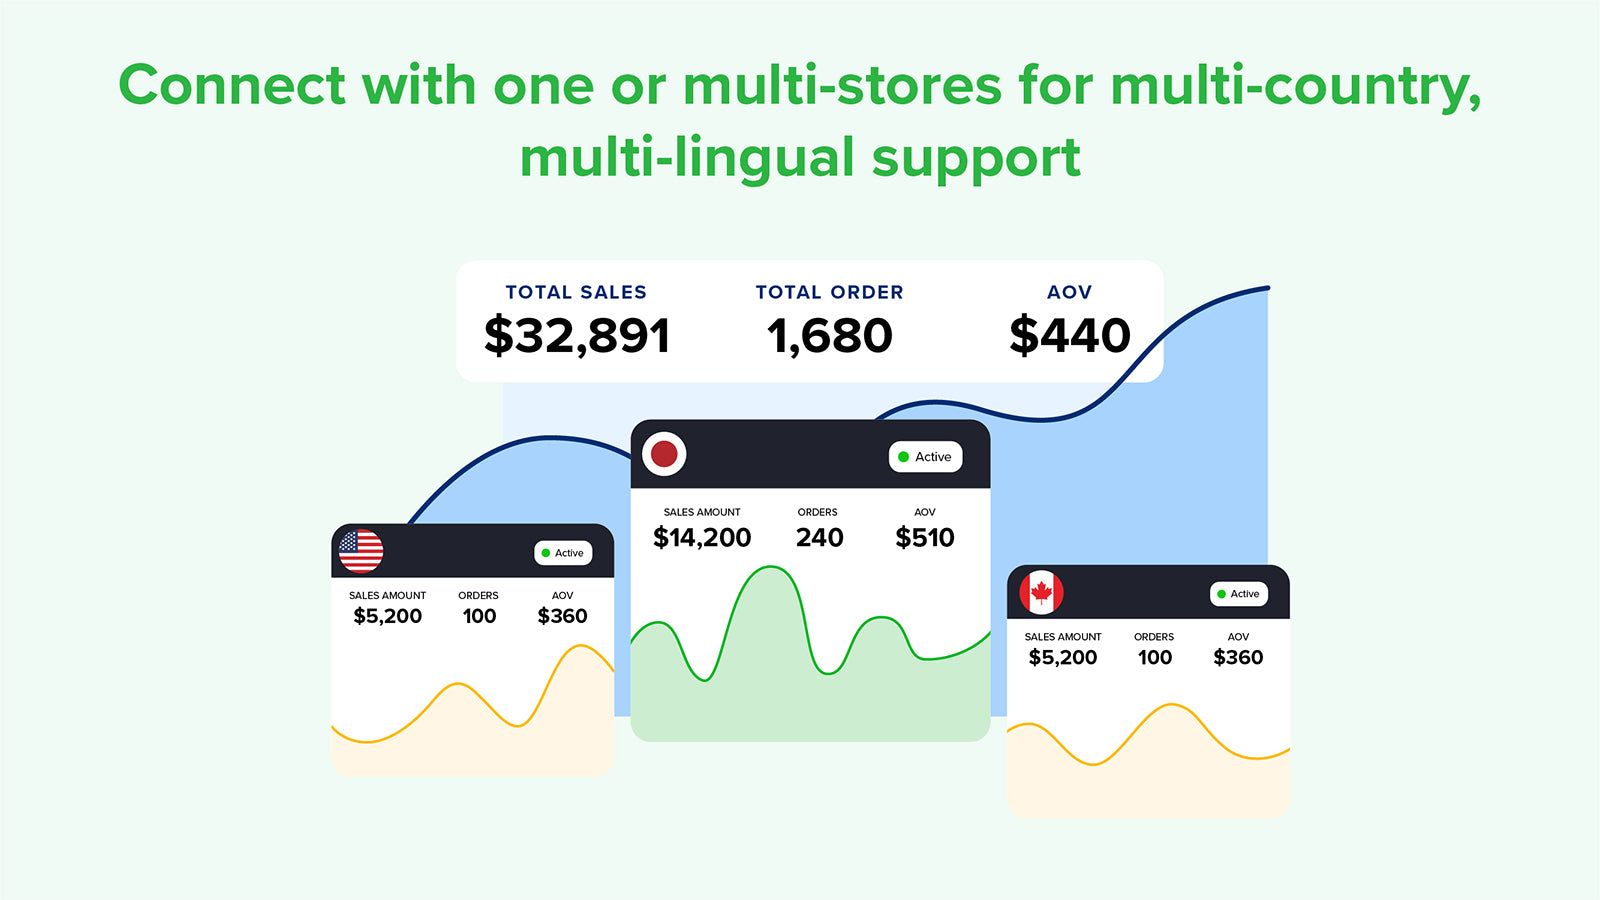 CLEARomni manages multiple shopify stores multi-lingual